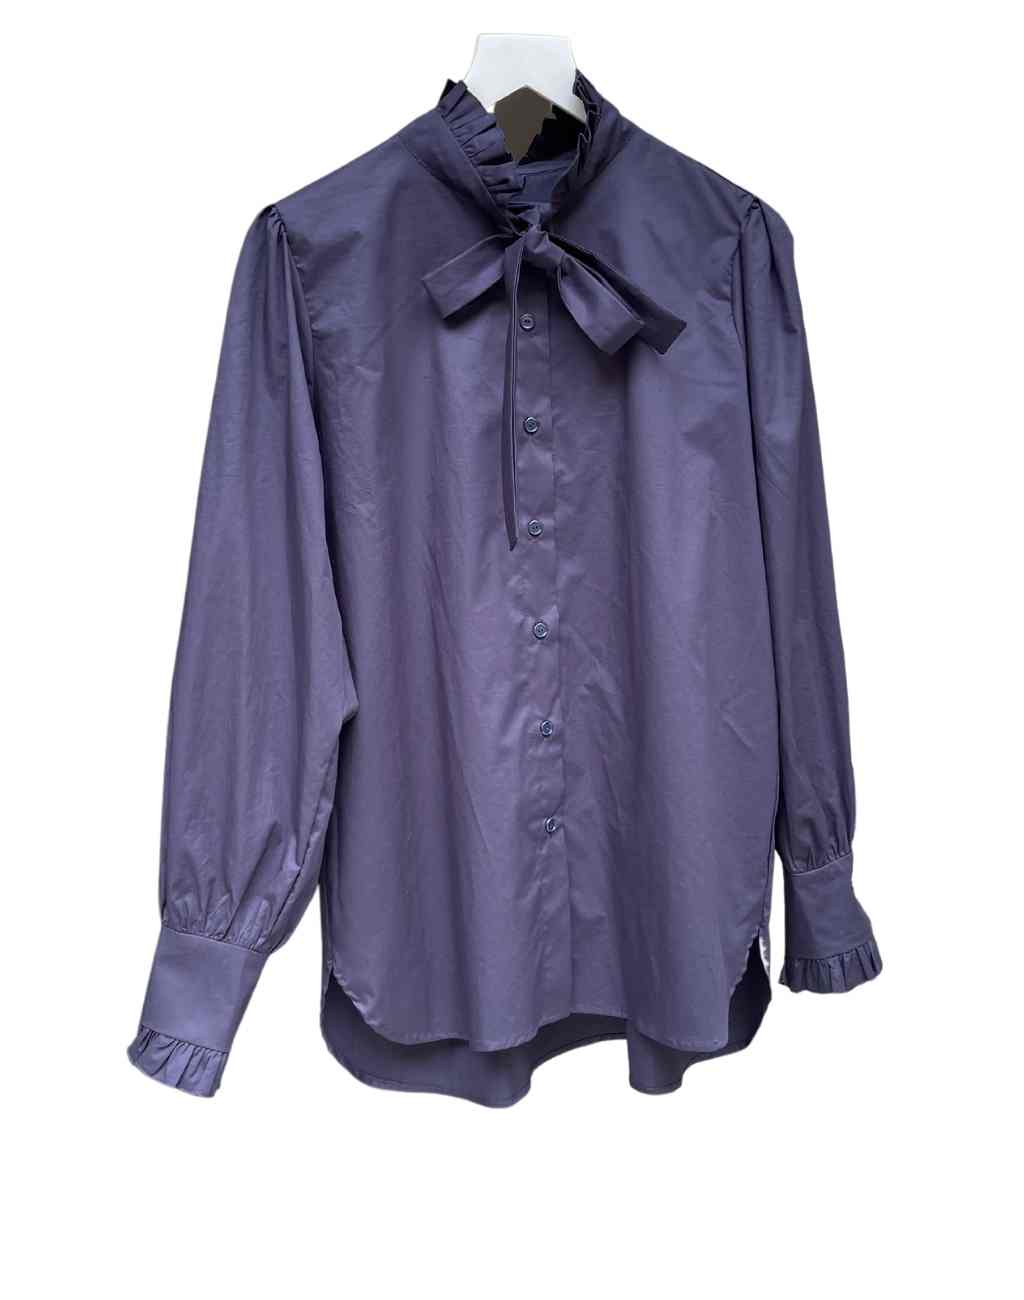 Classic Navy Diane Blouse with Tie and Ruffle at Neck | Long Sleeves with Ruffled Cuff - Visit Nifty Monica Nera 